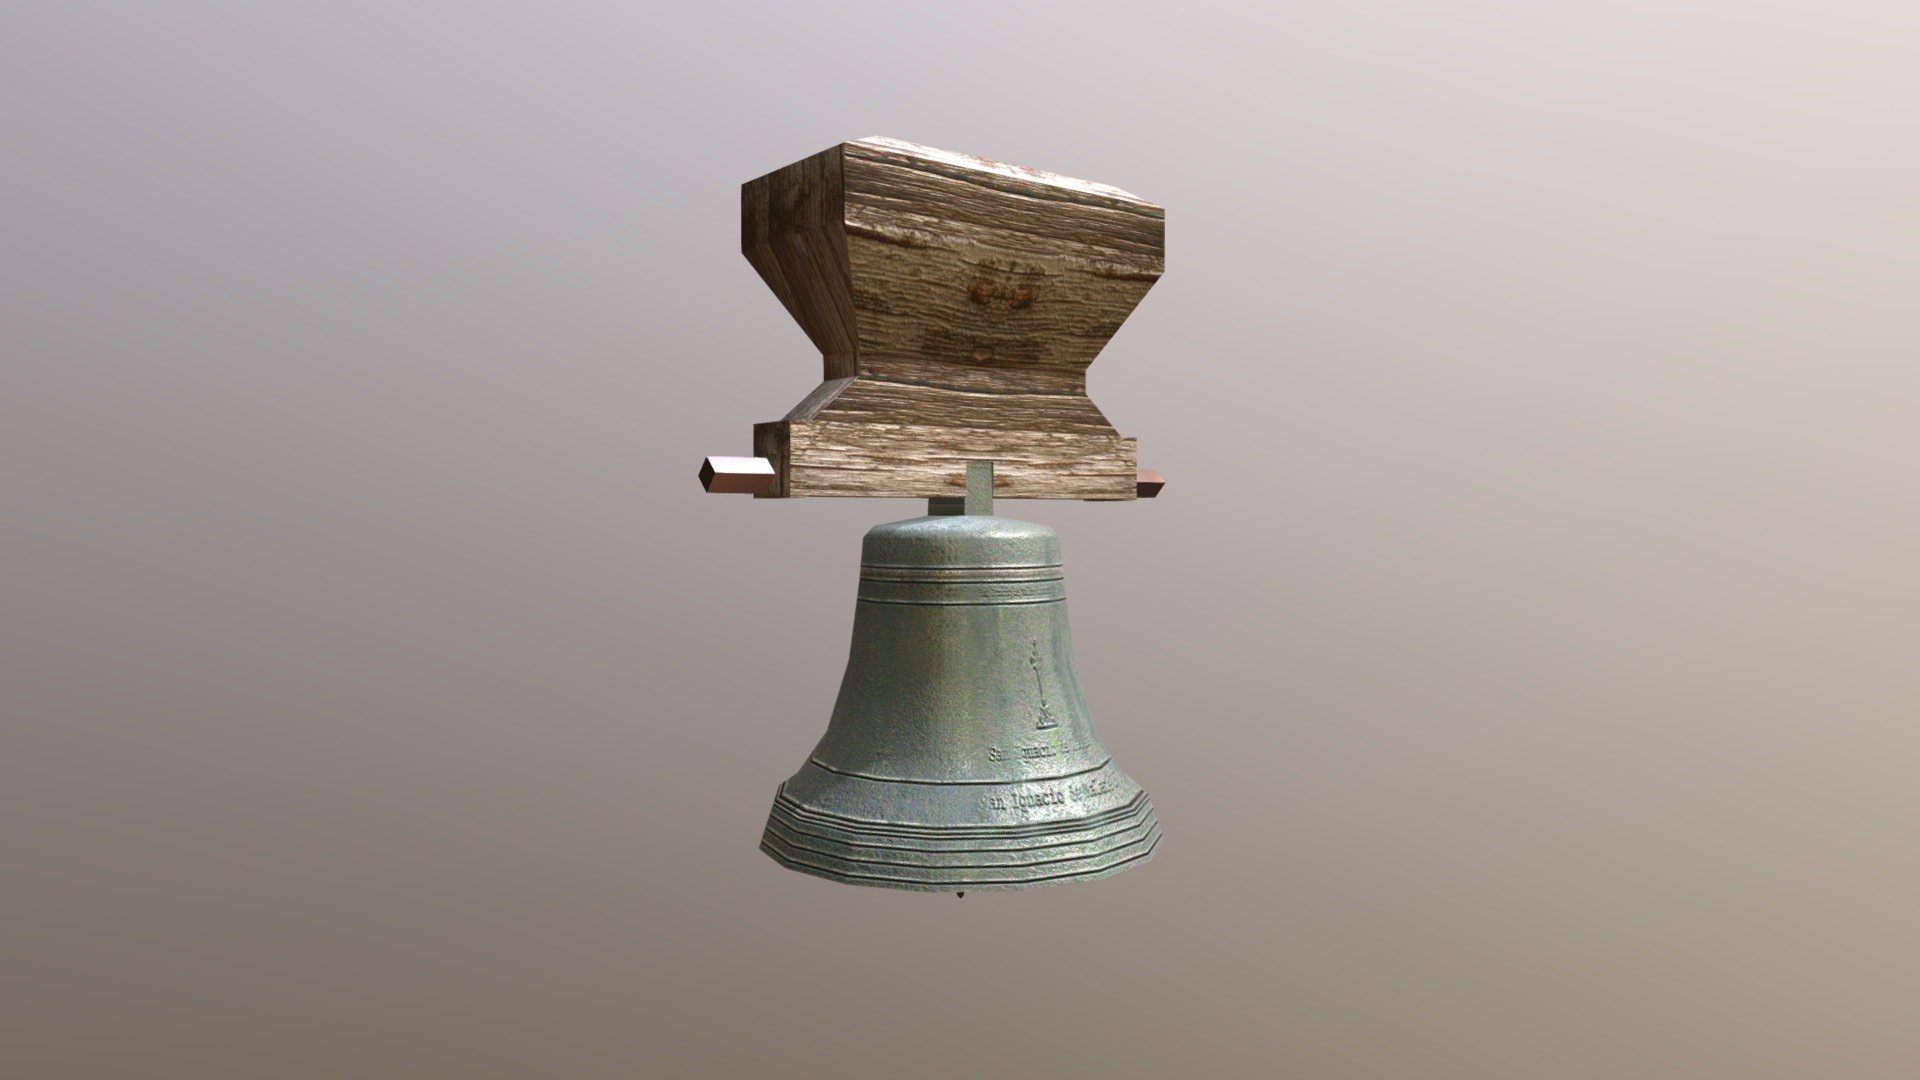 An old  Philippine / Spanish Church Bell
Model was still being worked on at the time, modeled in 2014.

Modeled for the 3D Interactive environment called Activeworlds and was to be animated 3d model